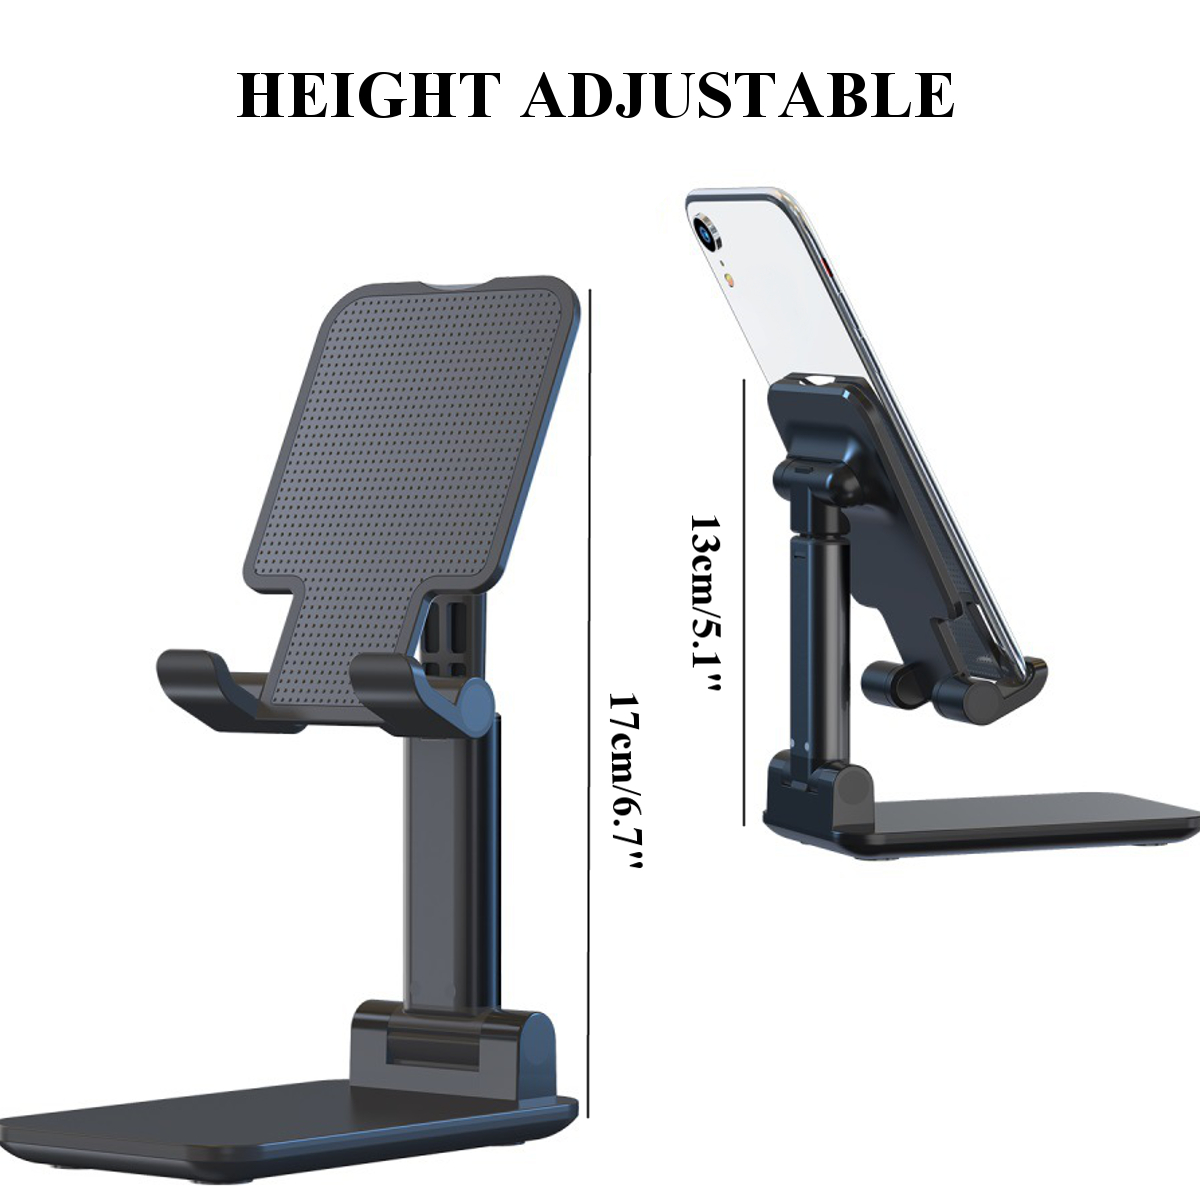 CCT4-Universal-Folding-Telescopic-Desktop-Mobile-Phone-Tablet-Holder-Stand-for-iPad-Air-for-iPhone-1-1811828-5